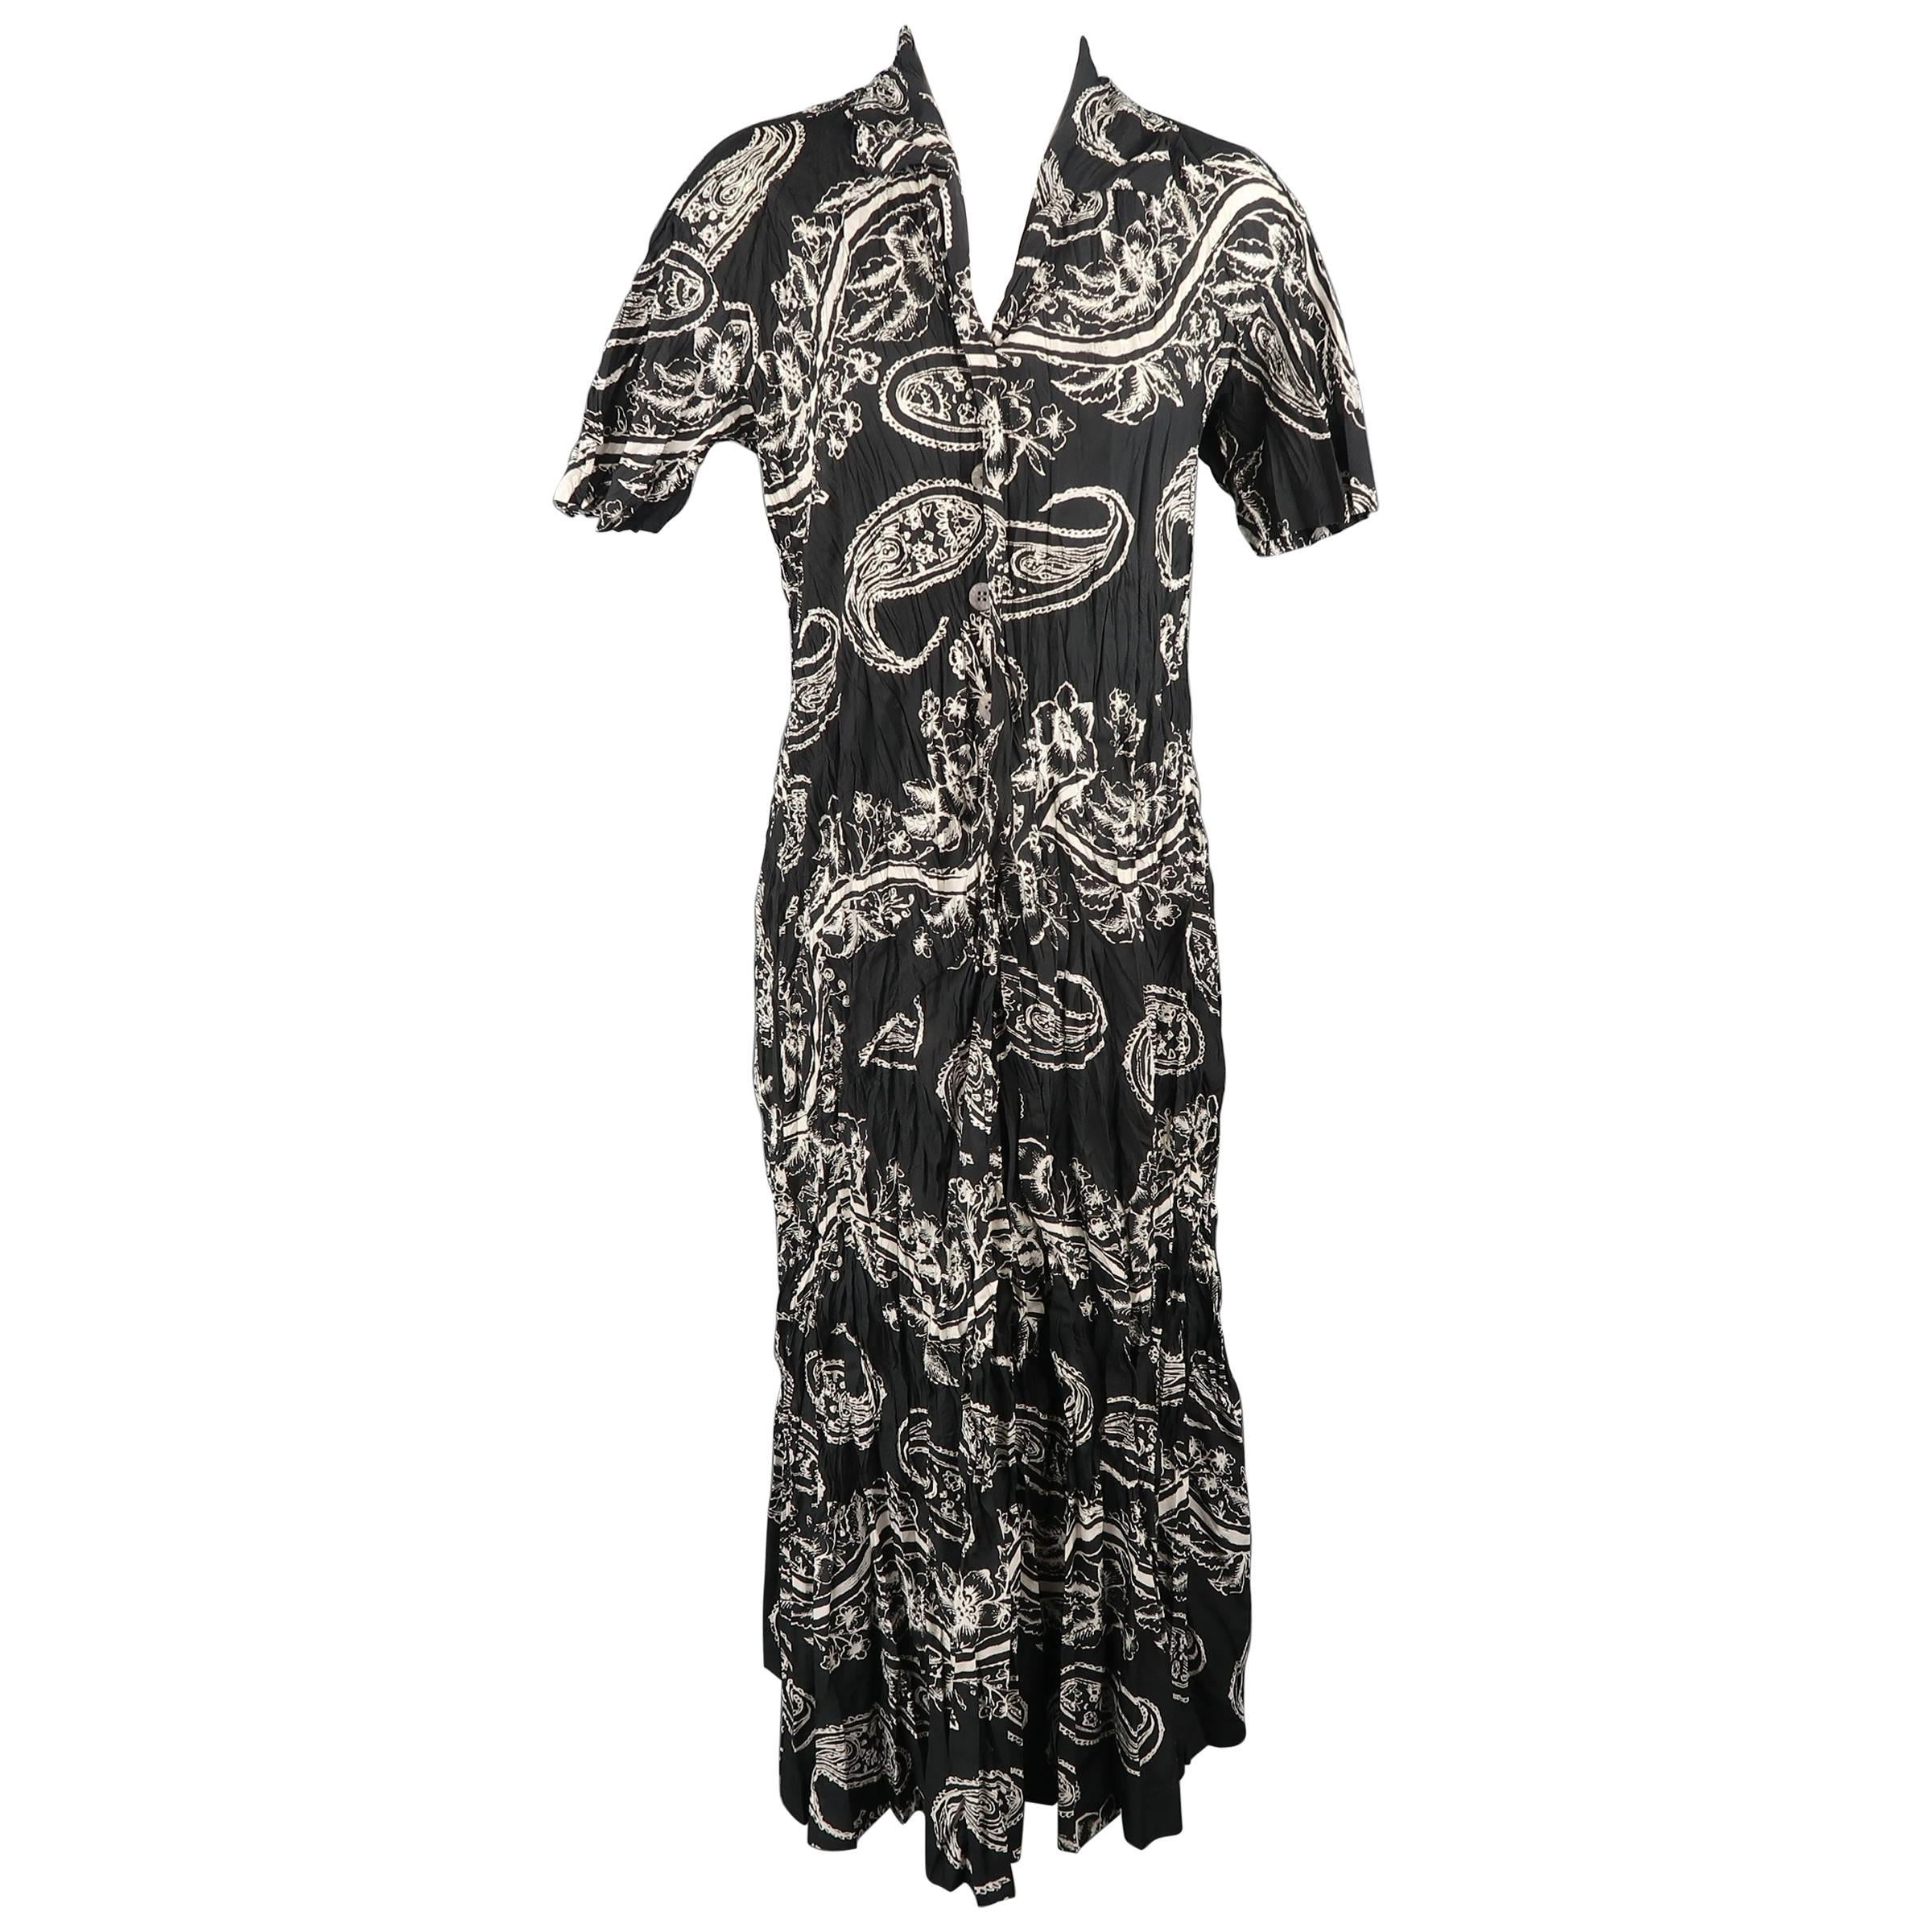 Issey Miyake Black and White Floral Paisley Wrinkle Collared Dress